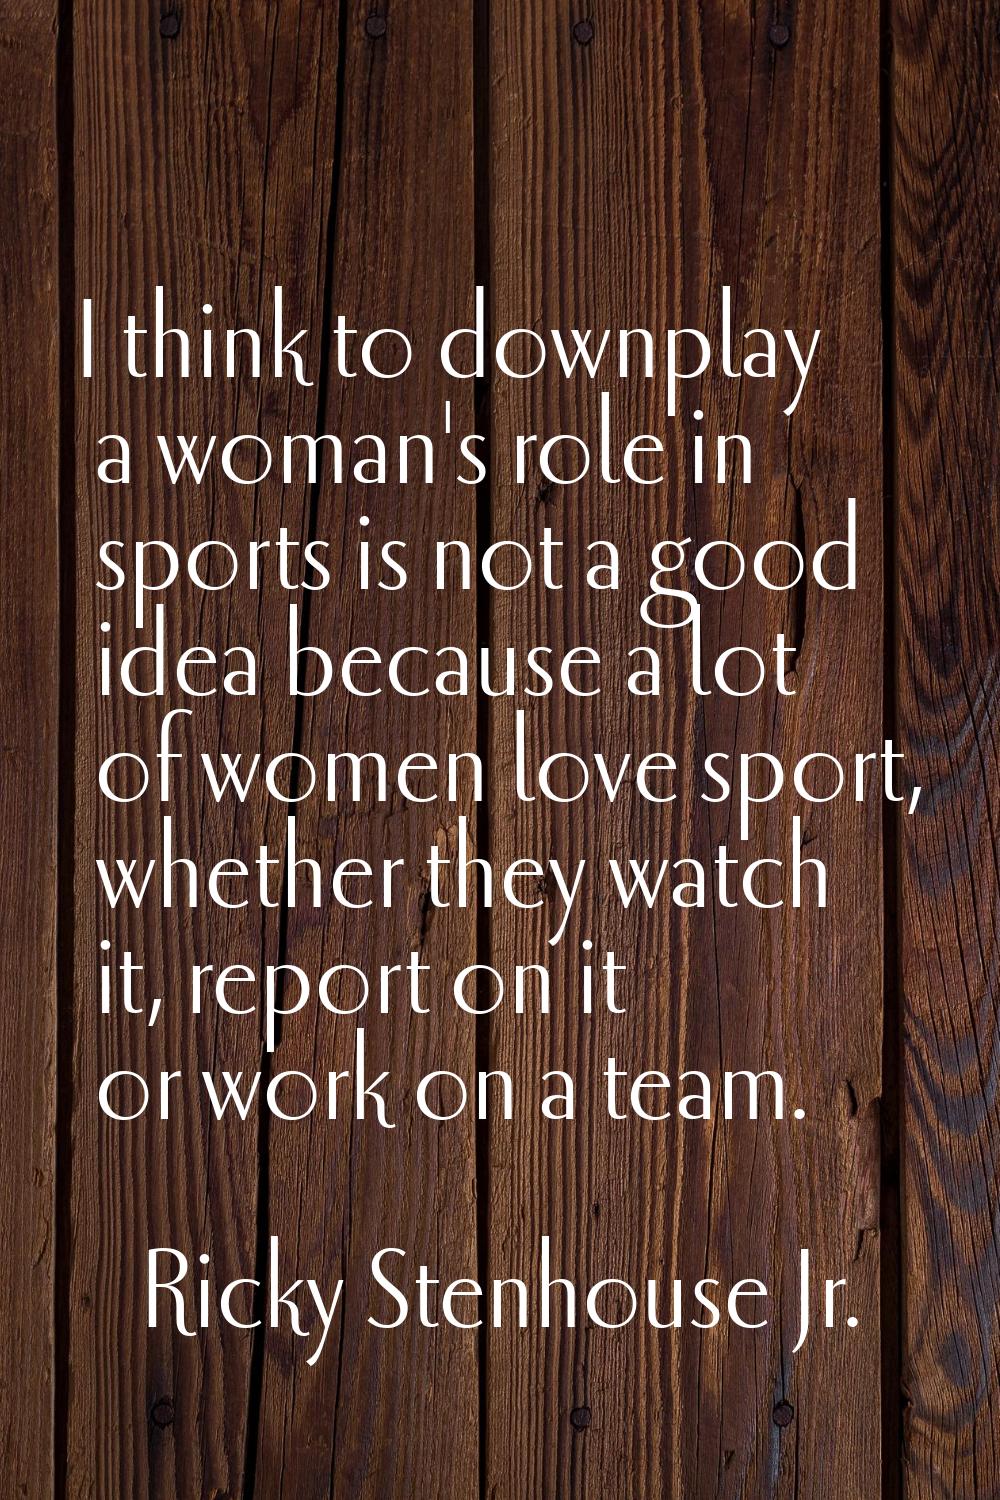 I think to downplay a woman's role in sports is not a good idea because a lot of women love sport, 